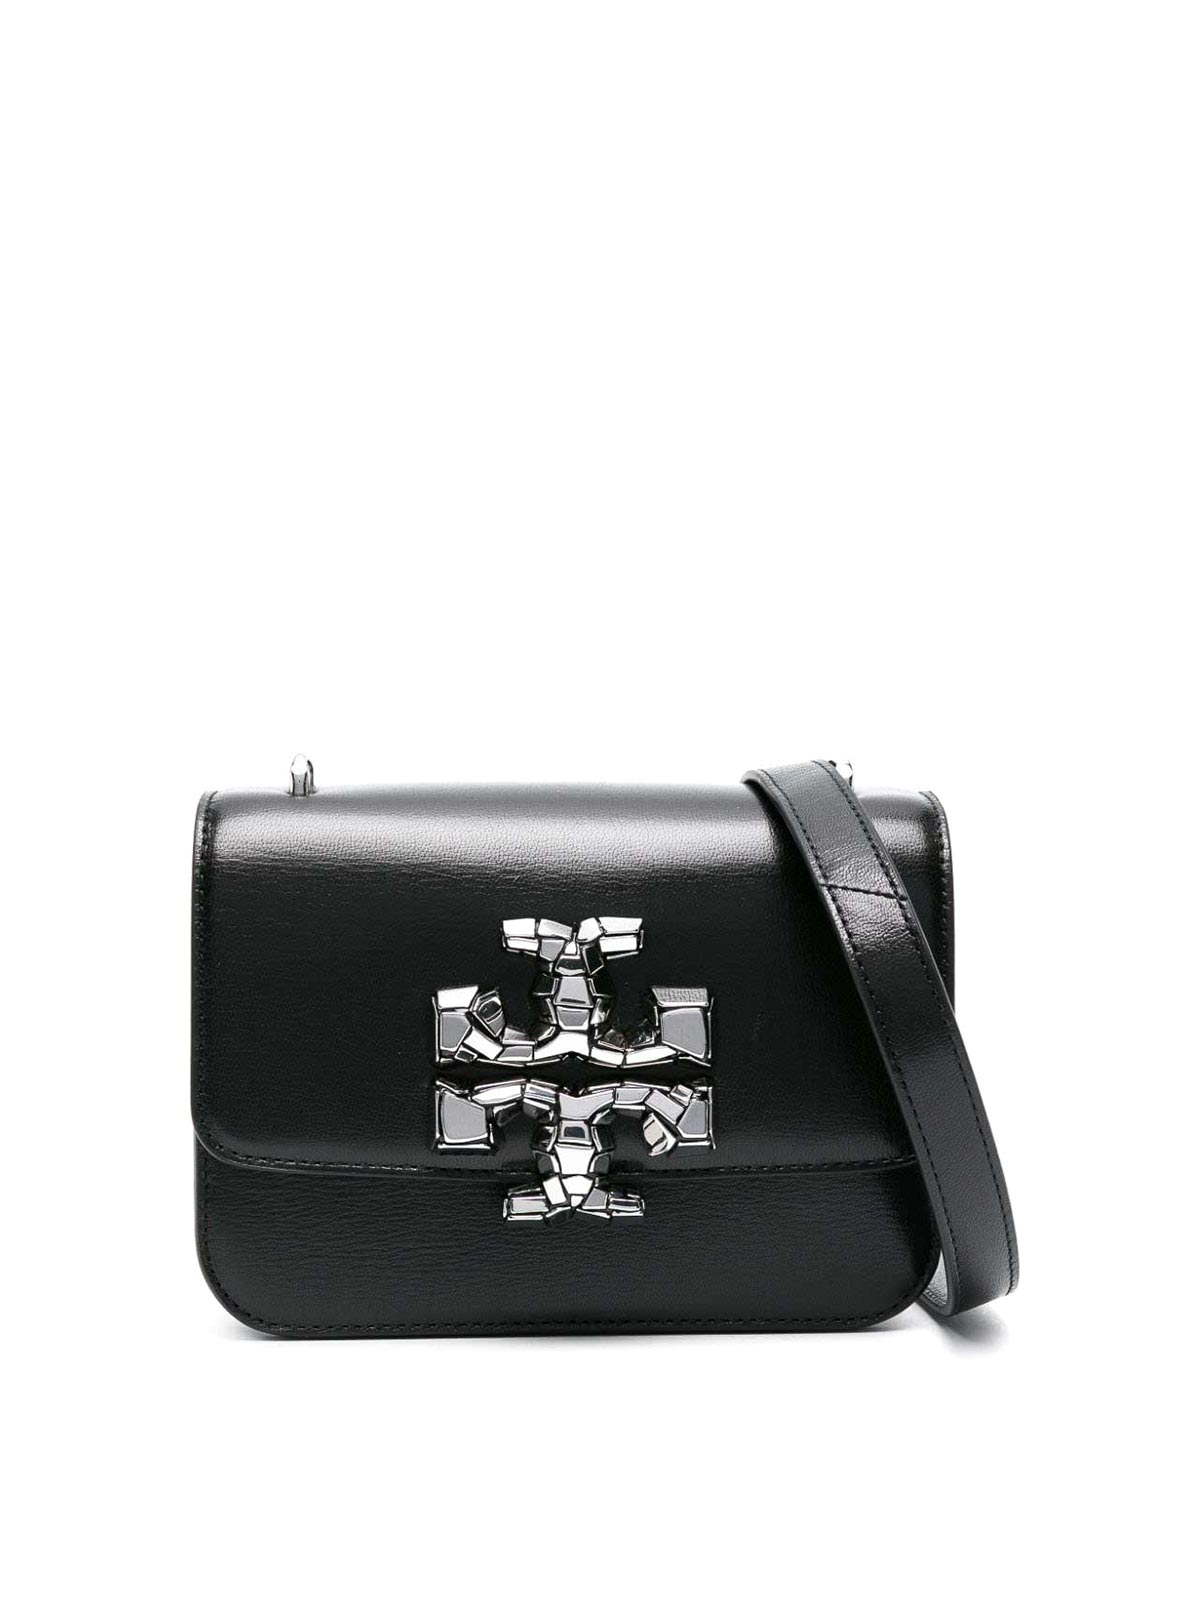 Tory Burch `eleanor Distressed` Small Convertible Shoulder Bag In Black  